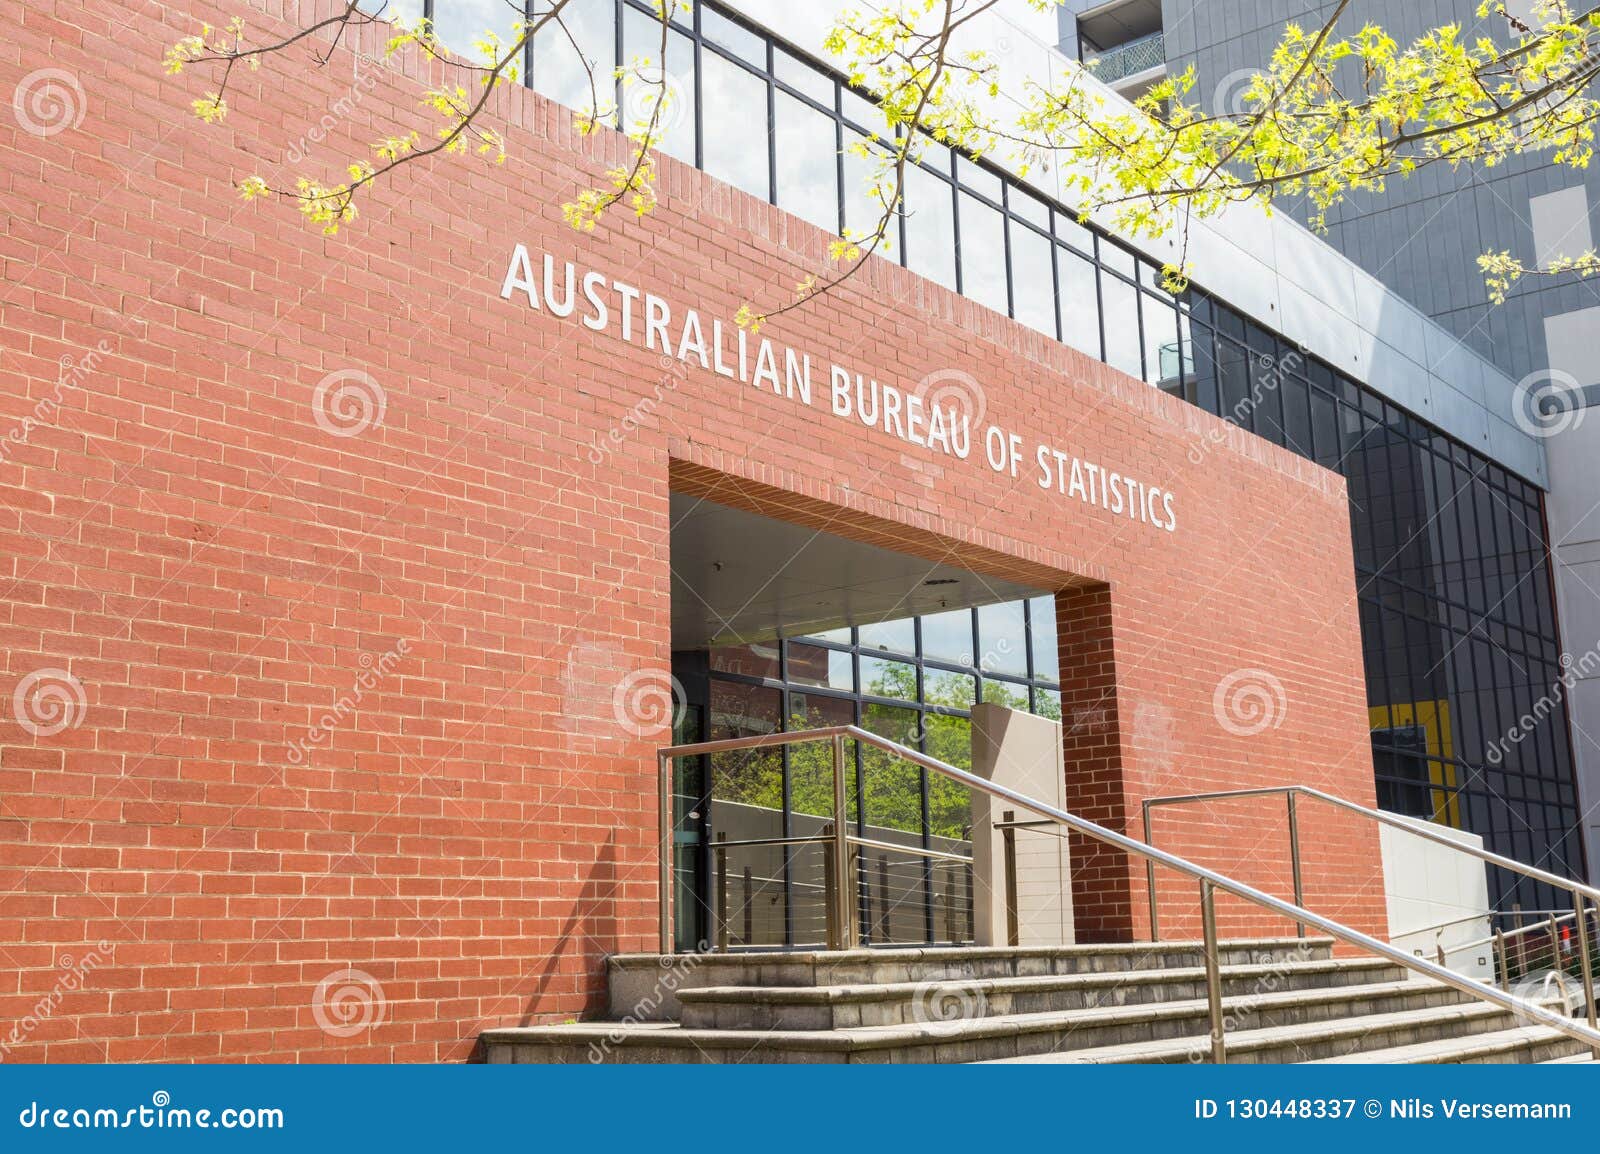 Geelong Office of the Australian of Statistics in Photography - Image evidence, victoria: 130448337